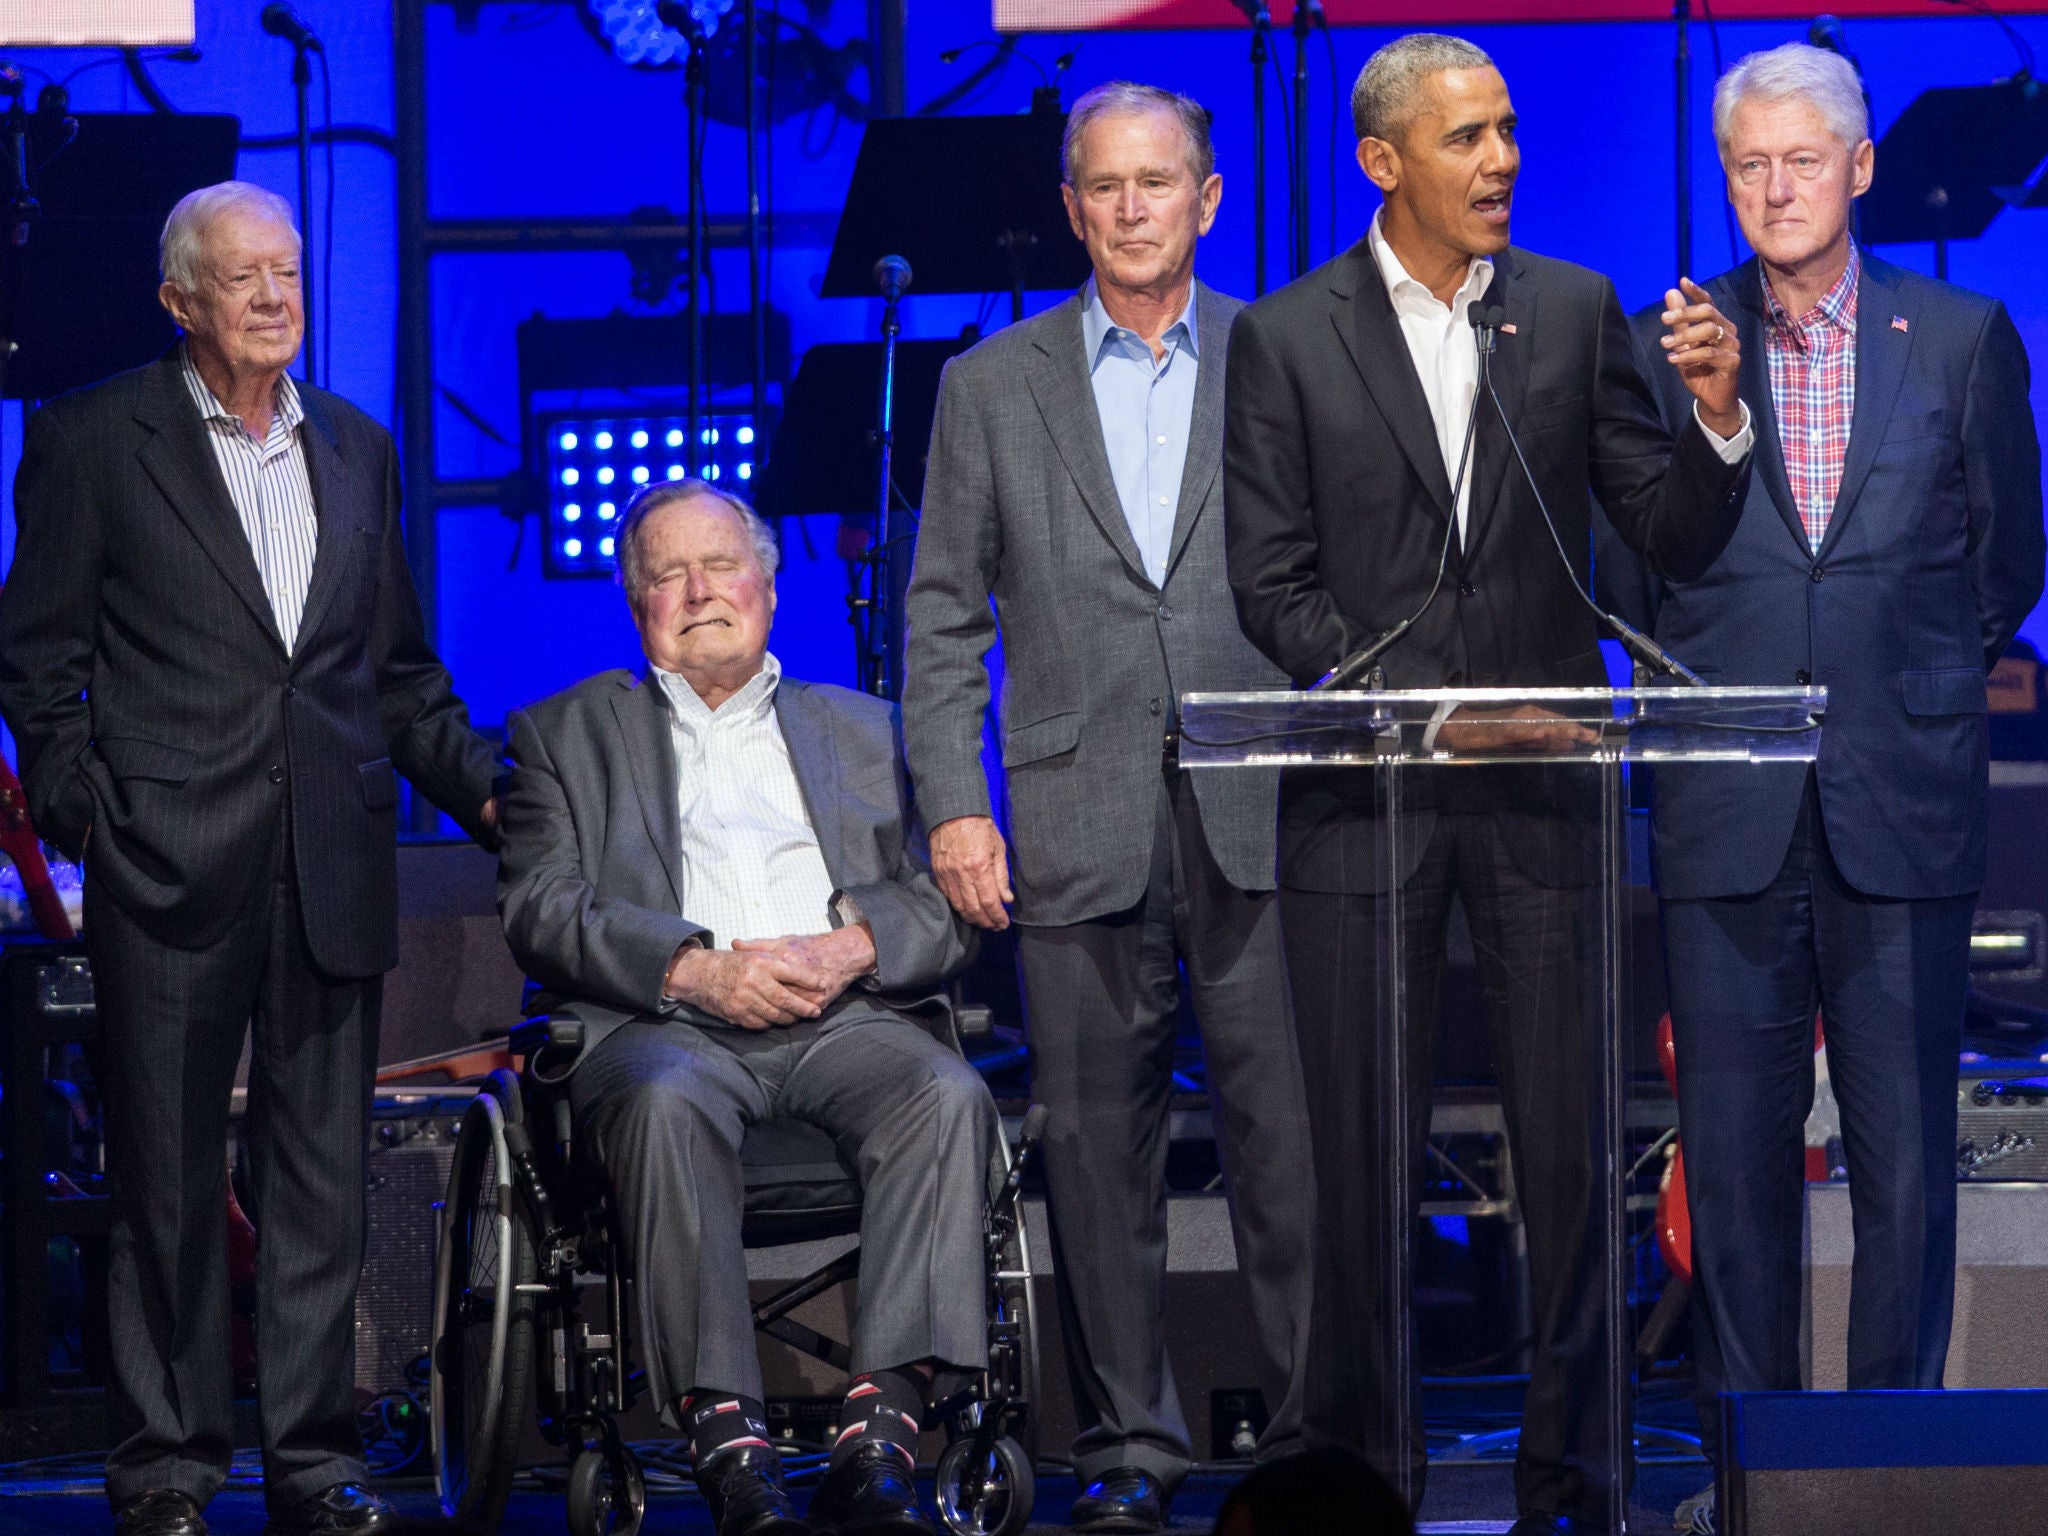 Former US presidents (from left to right) Jimmy Carter, George HW Bush, George W Bush, Barack Obama and Bill Clinton in 2017